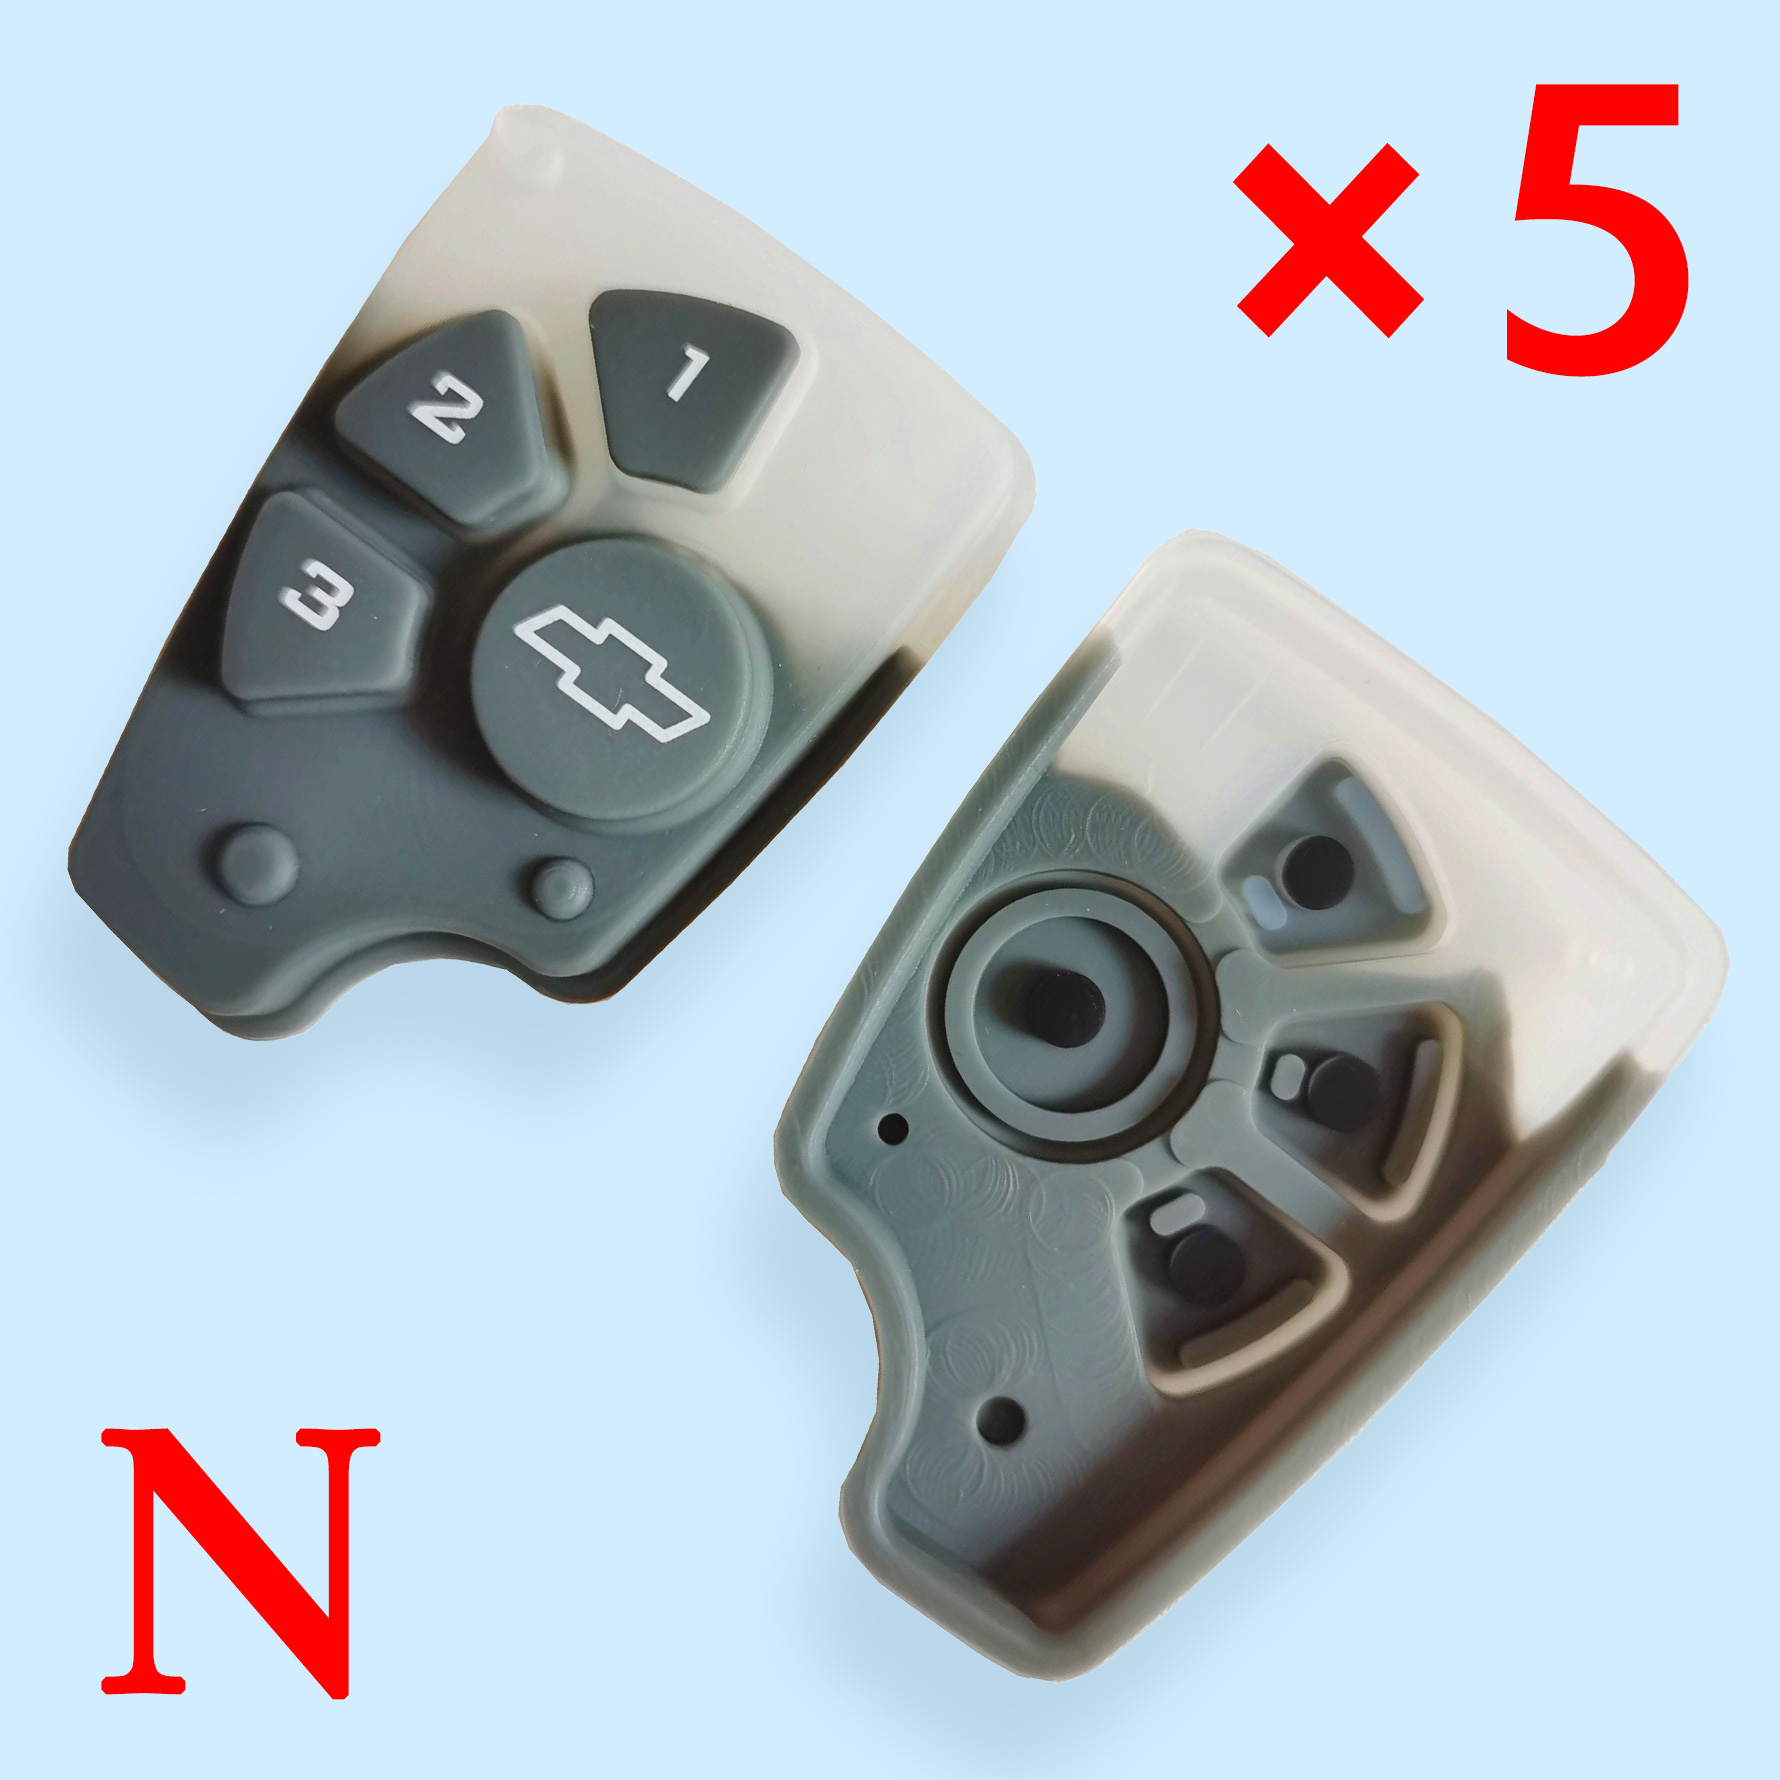 4 Buttons Key Shell Cover for Chevrolet - Pack of 5